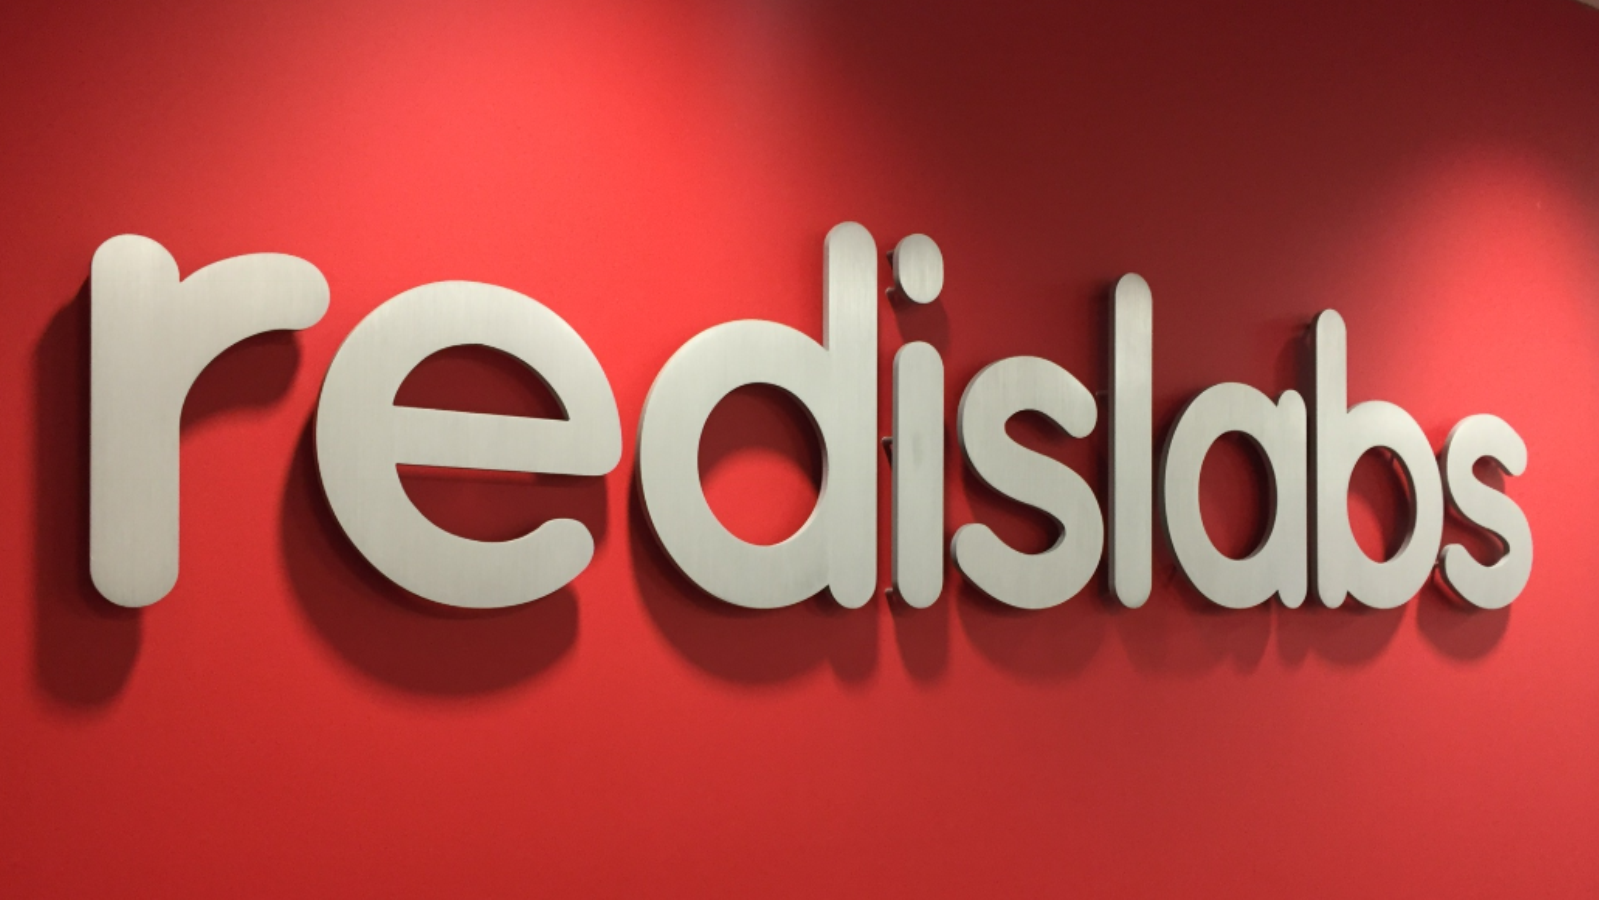 Database software developer Redis Labs raised a $60m Series E round in February 2019. Photo: courtesy